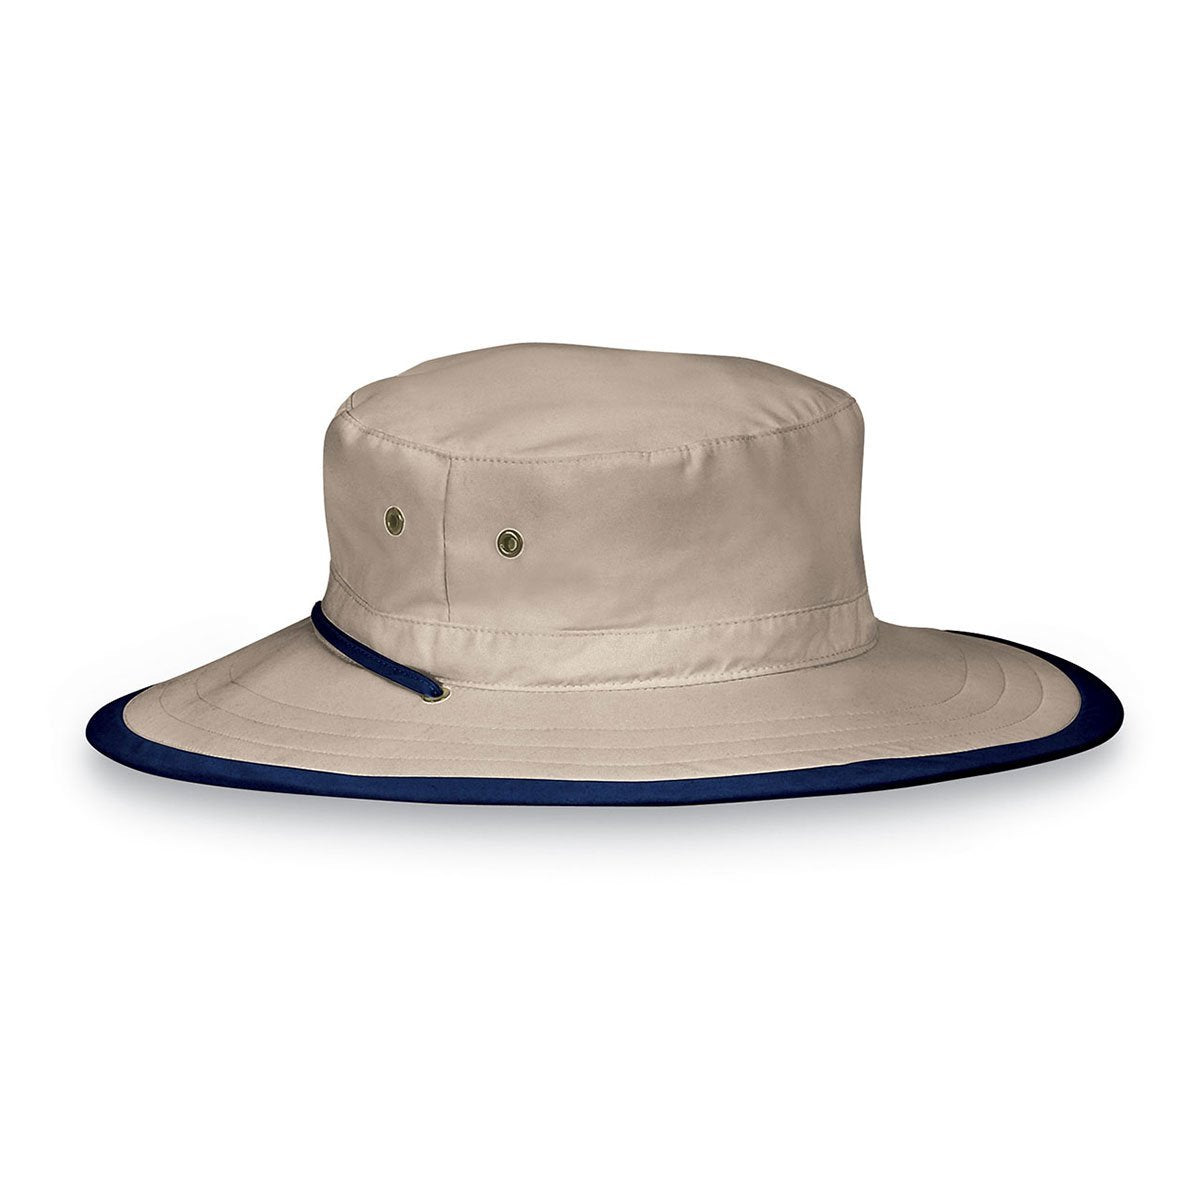 Featuring Kid's Adjustable Jr. Explorer Microfiber UPF Sun Hat with Chinstrap in Camel Navy from Wallaroo